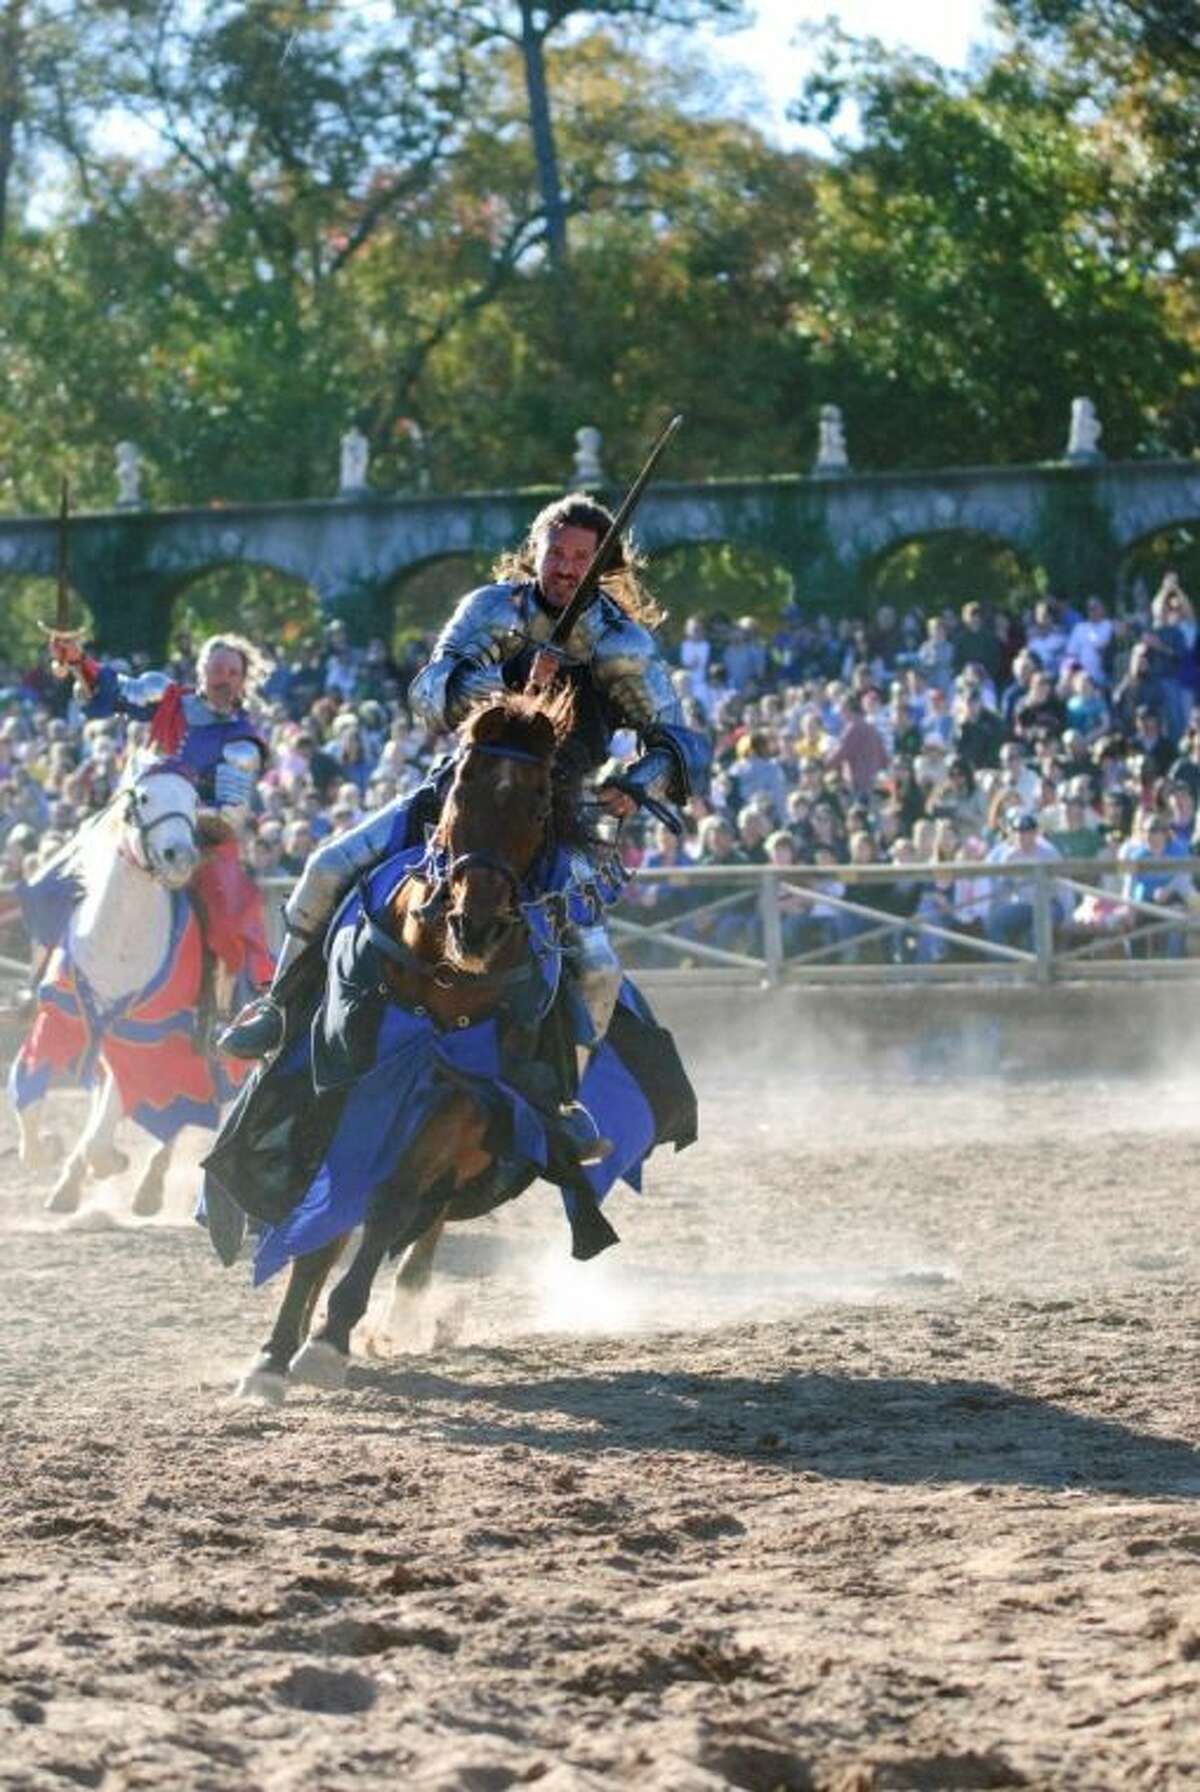 The 39th Texas Renaissance Festival offers an interactive experience